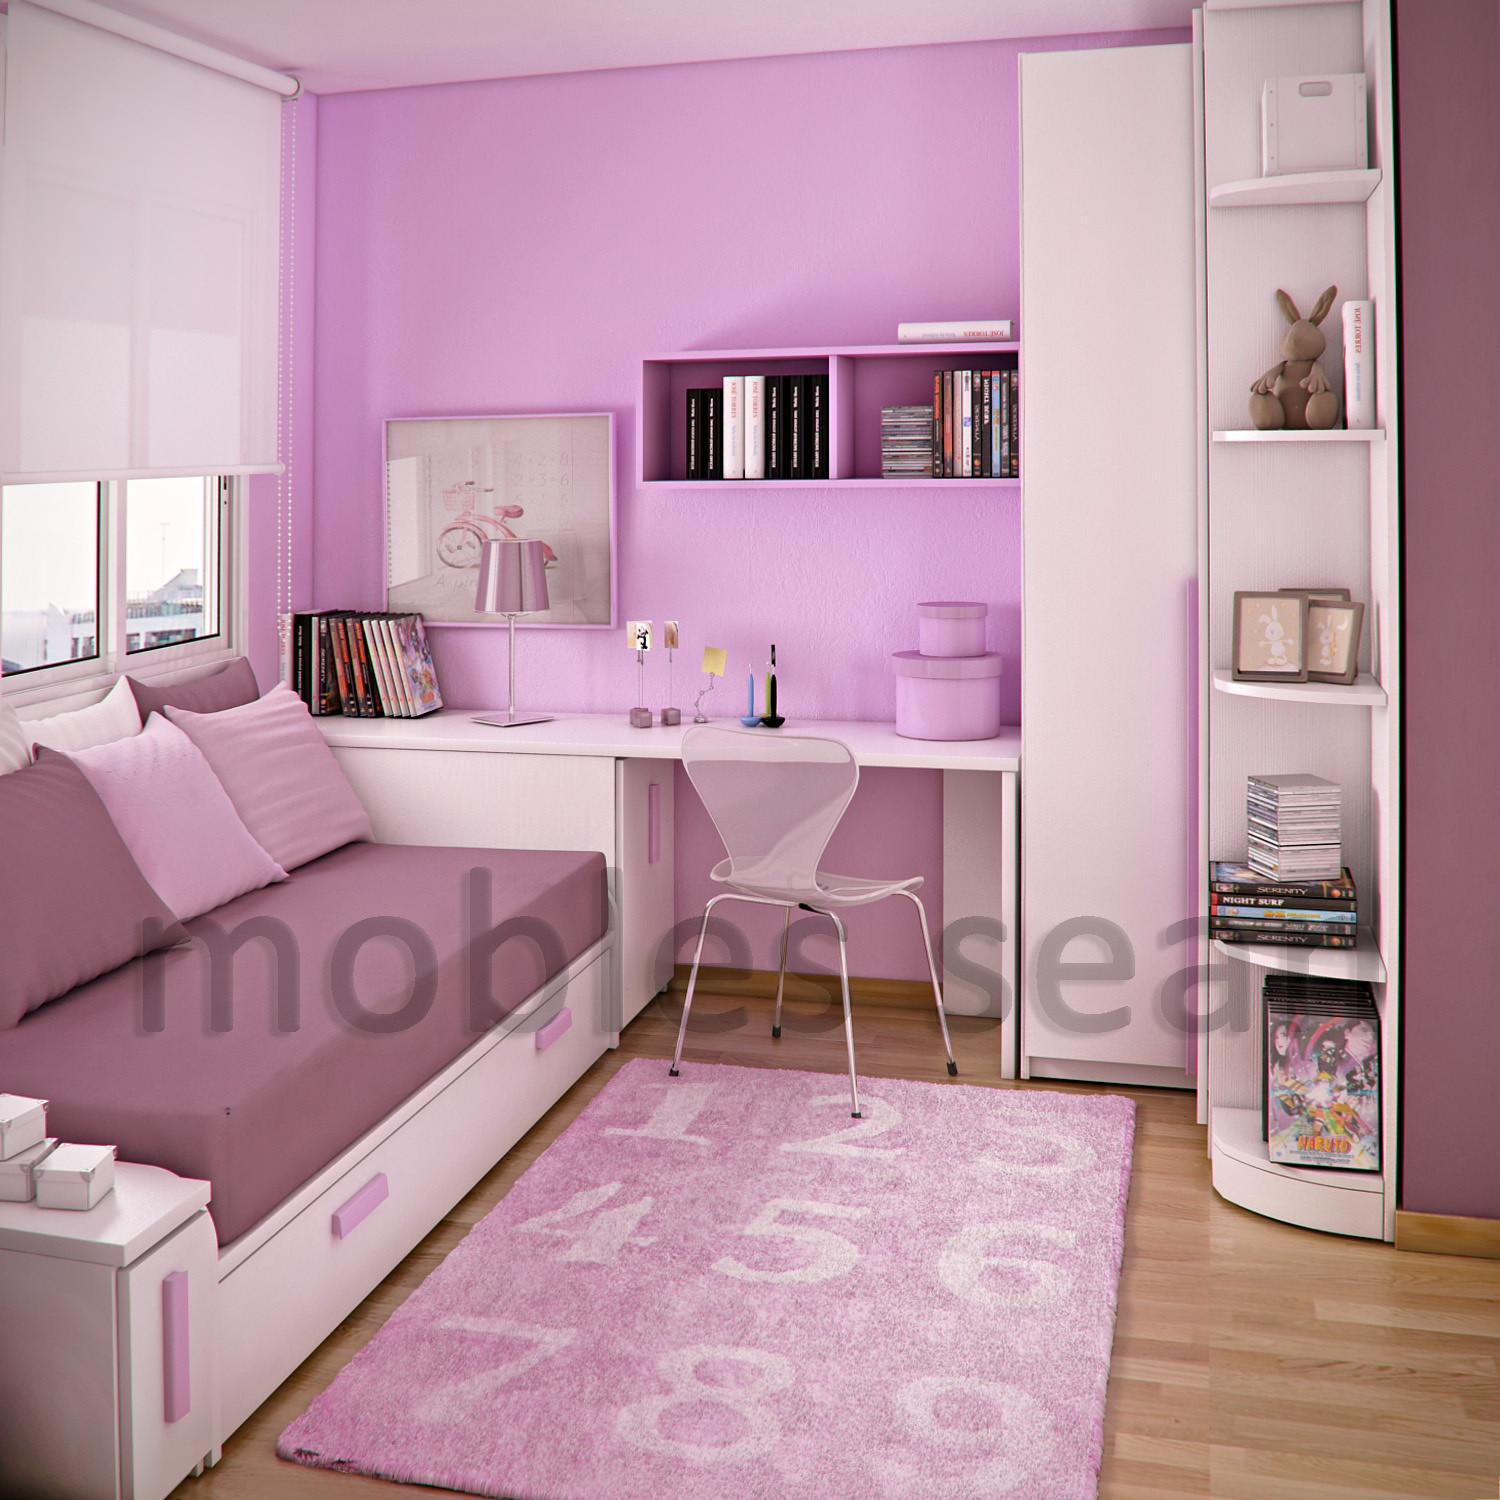 Small Kids Bedroom Ideas
 Space Saving Designs for Small Kids Rooms